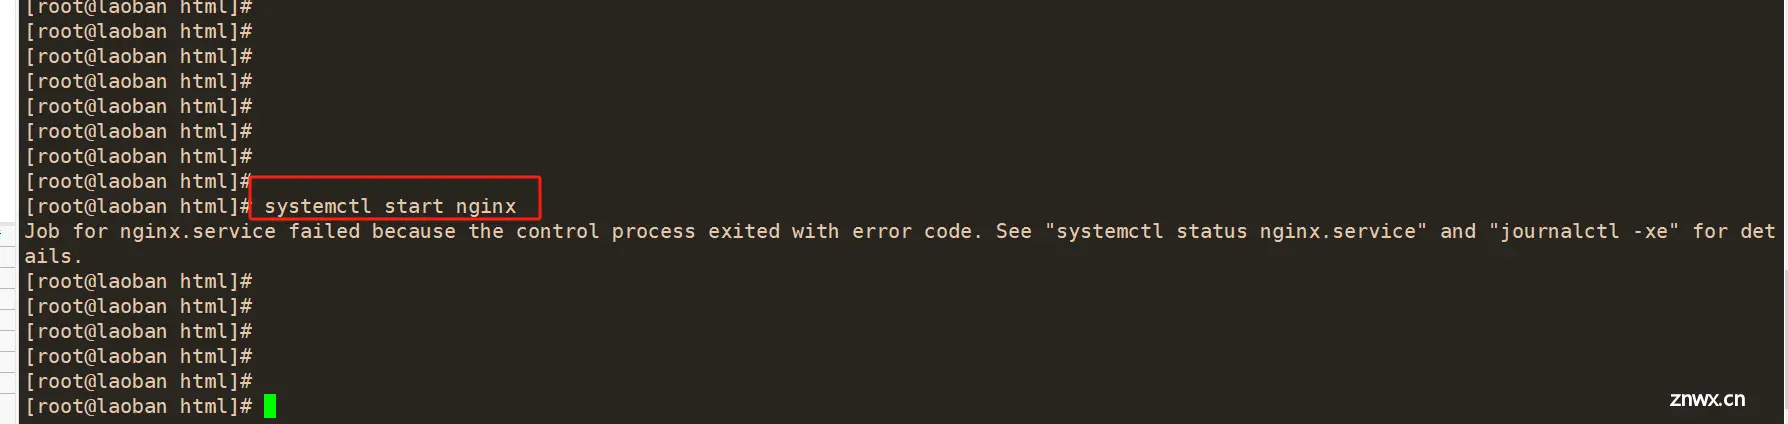 nginx启动报错Job for nginx.service failed because the control process exited with error code. See “syste